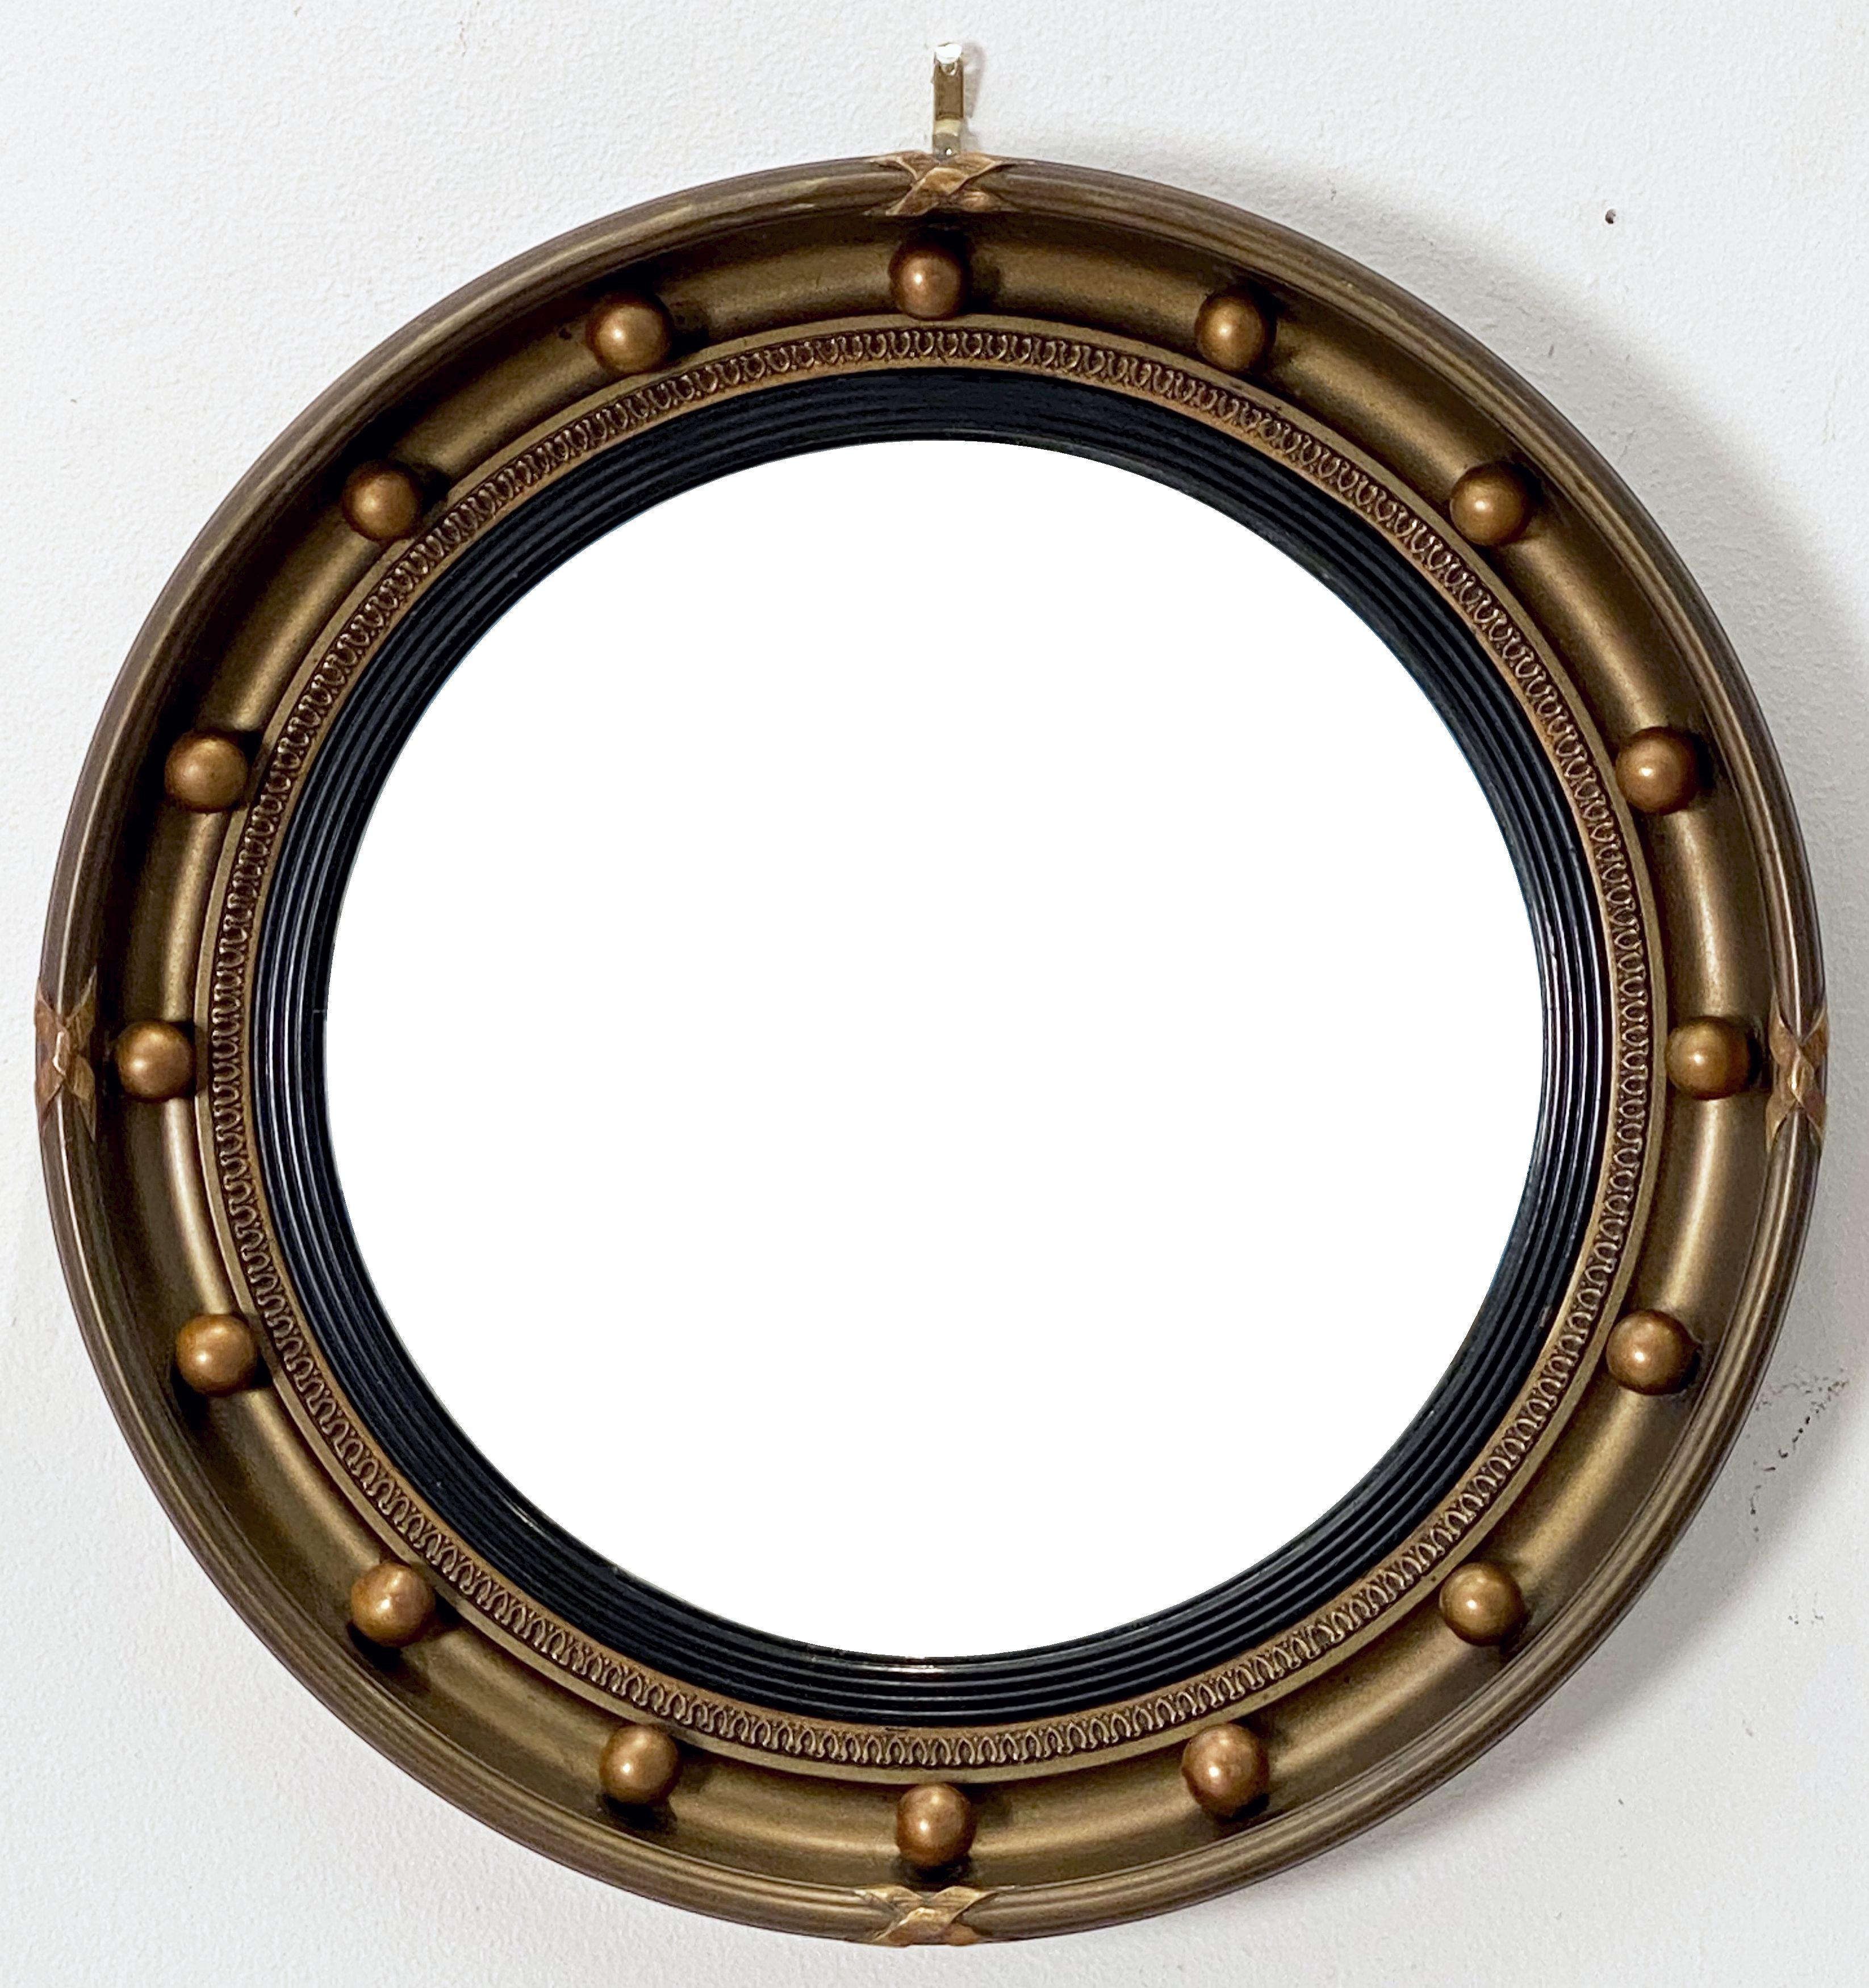 A fine English round or circular convex mirror featuring a Regency design of a moulded gilt frame and ebonized trim, with gilt balls around the circumference.

Dimensions: Diameter 16 1/2 inches x depth 2 1/2 inches.